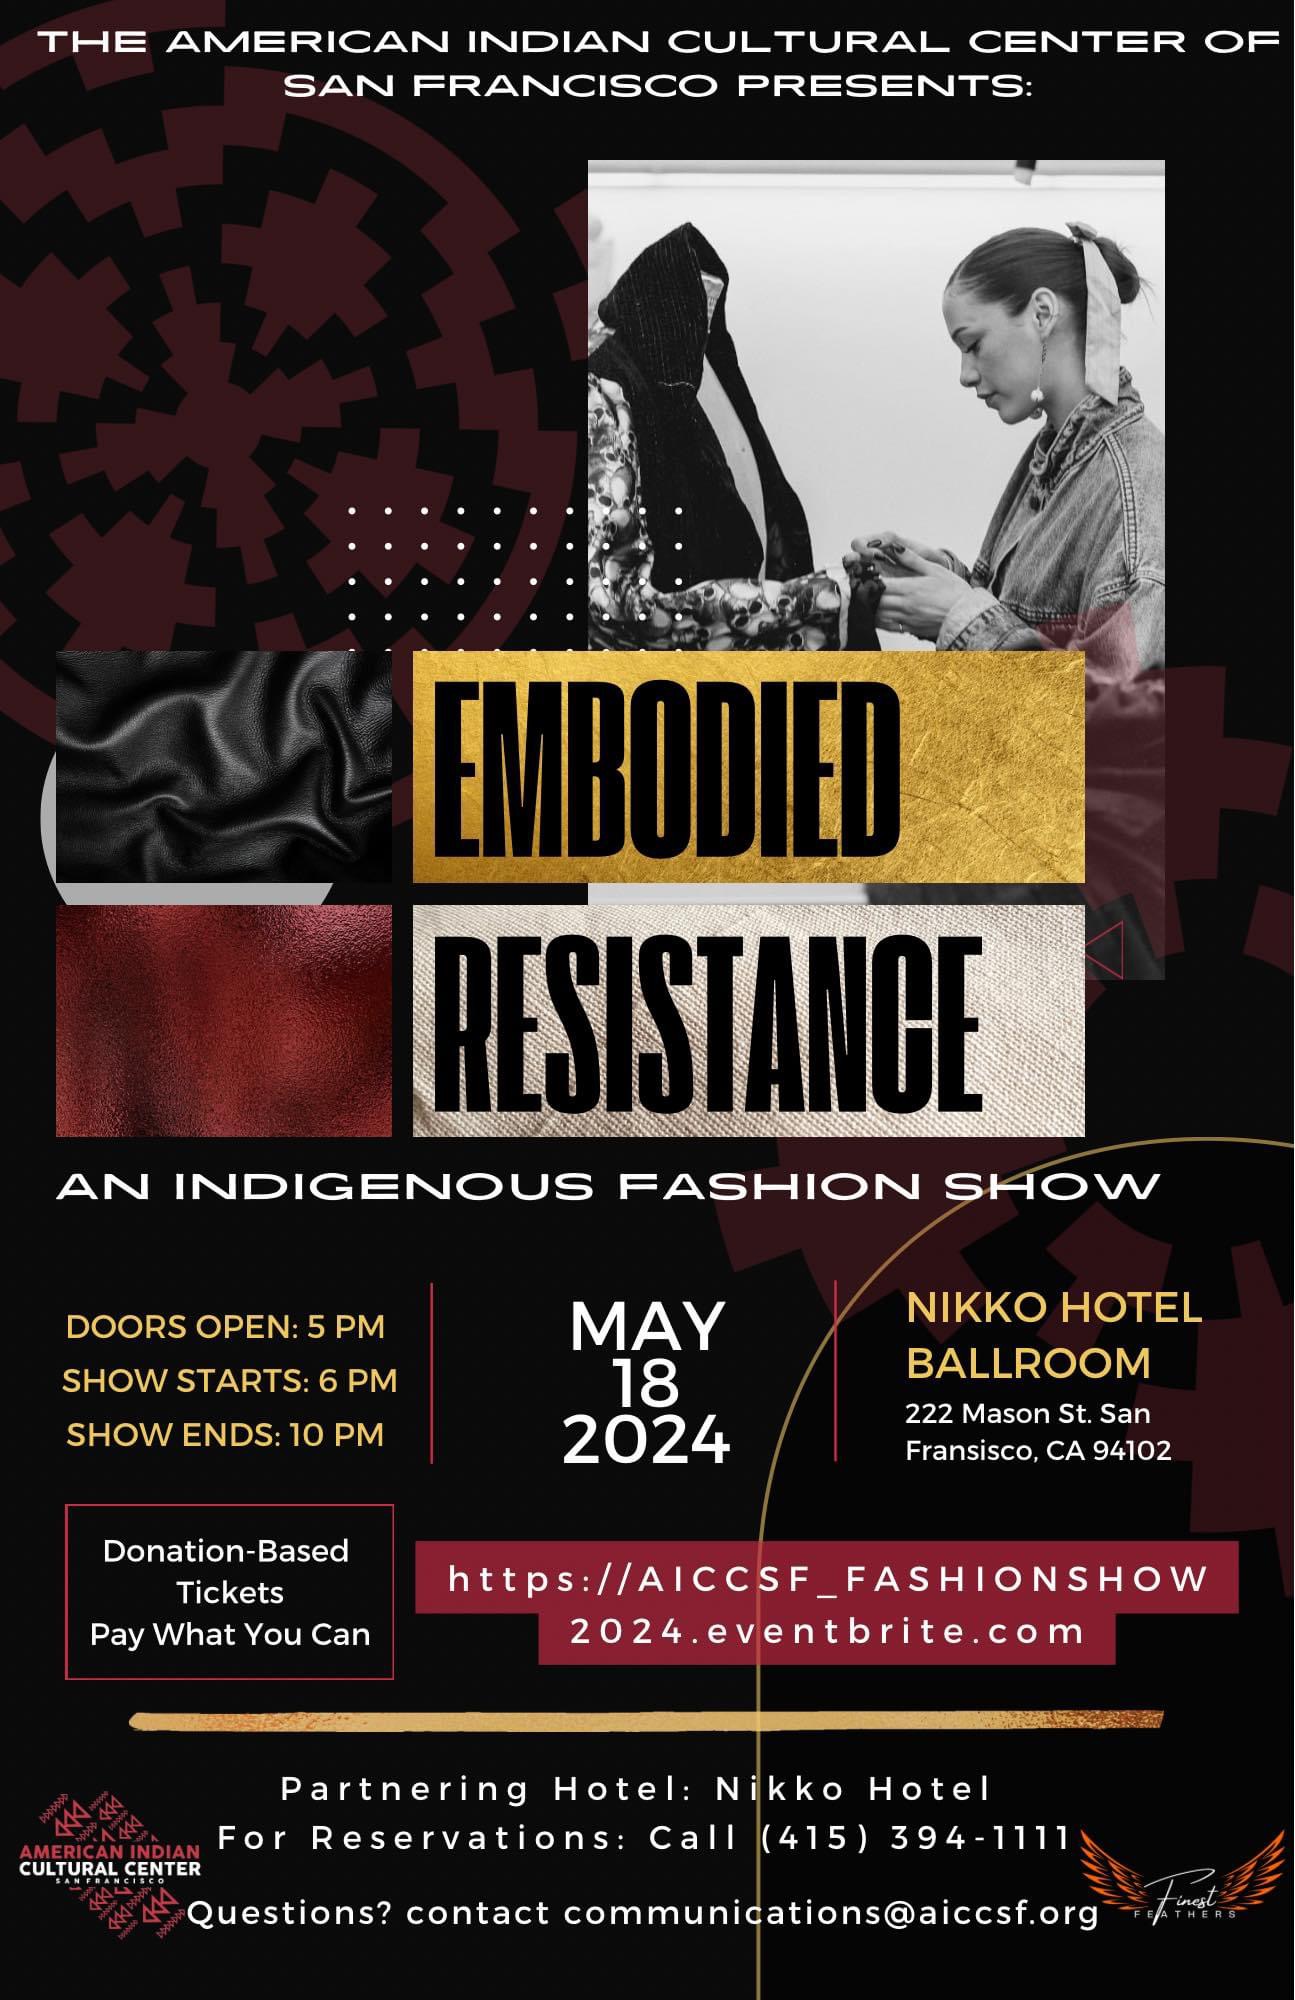 A Native American woman tailoring a coat. The American Indian Cultural Center of San Francisco presents: Embodied Resistance: An Indigenous Fashion Show. May 18, 2024. Doors open: 5PM. Show starts: 6 PM. Show Ends: 10PM. Nikko Hotel Ballroom. 222 Mason St. San Francisco, CA 94102. Donation-Based Tickets, Pay What You Can. https://AICCSF_FASHIONSHOW2024.eventbrite.com. Partnering Hotel: Nikko Hotel. For Reservations: Call (415) 394 - 1111. Questions? contact communications@aiccsf.org. Logos for American Indian Cultural Center San Francisco and Finest Feathers.